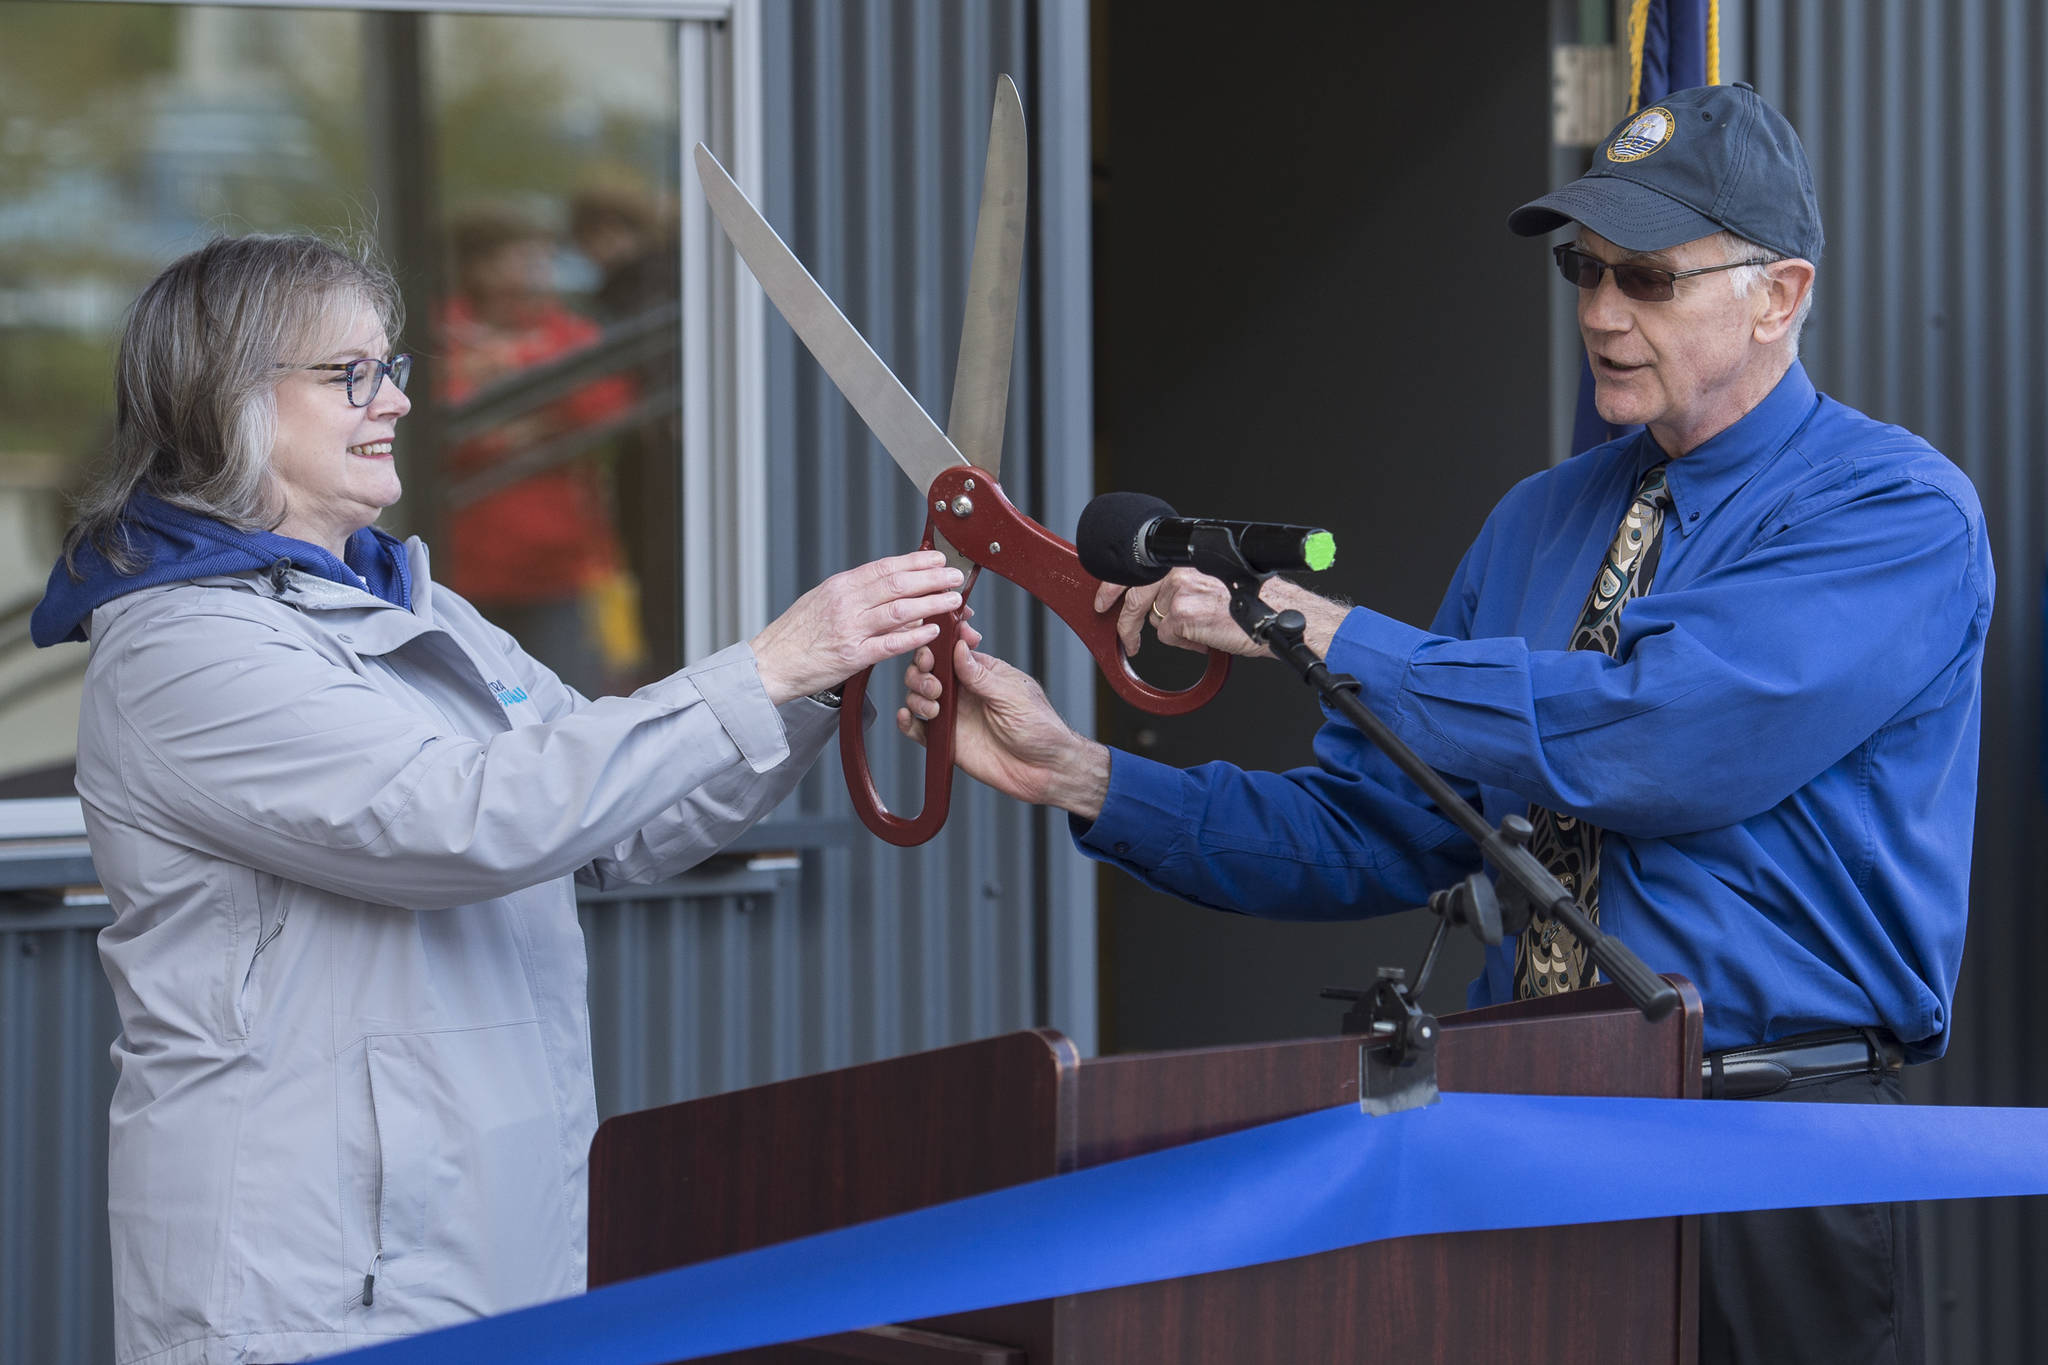 Port Director Carl Uchytil hands oversized scissors toTravel Juneau President & CEO Liz Perry during a ceremony to open the new Visitor’s Center Kiosk in front of the downtown Juneau Public Library on Friday, May 17, 2019. Numerous events celebrated infrastructure improvements by the City and Borough of Juneau Docks & Harbors Department this week. (Michael Penn | Juneau Empire)